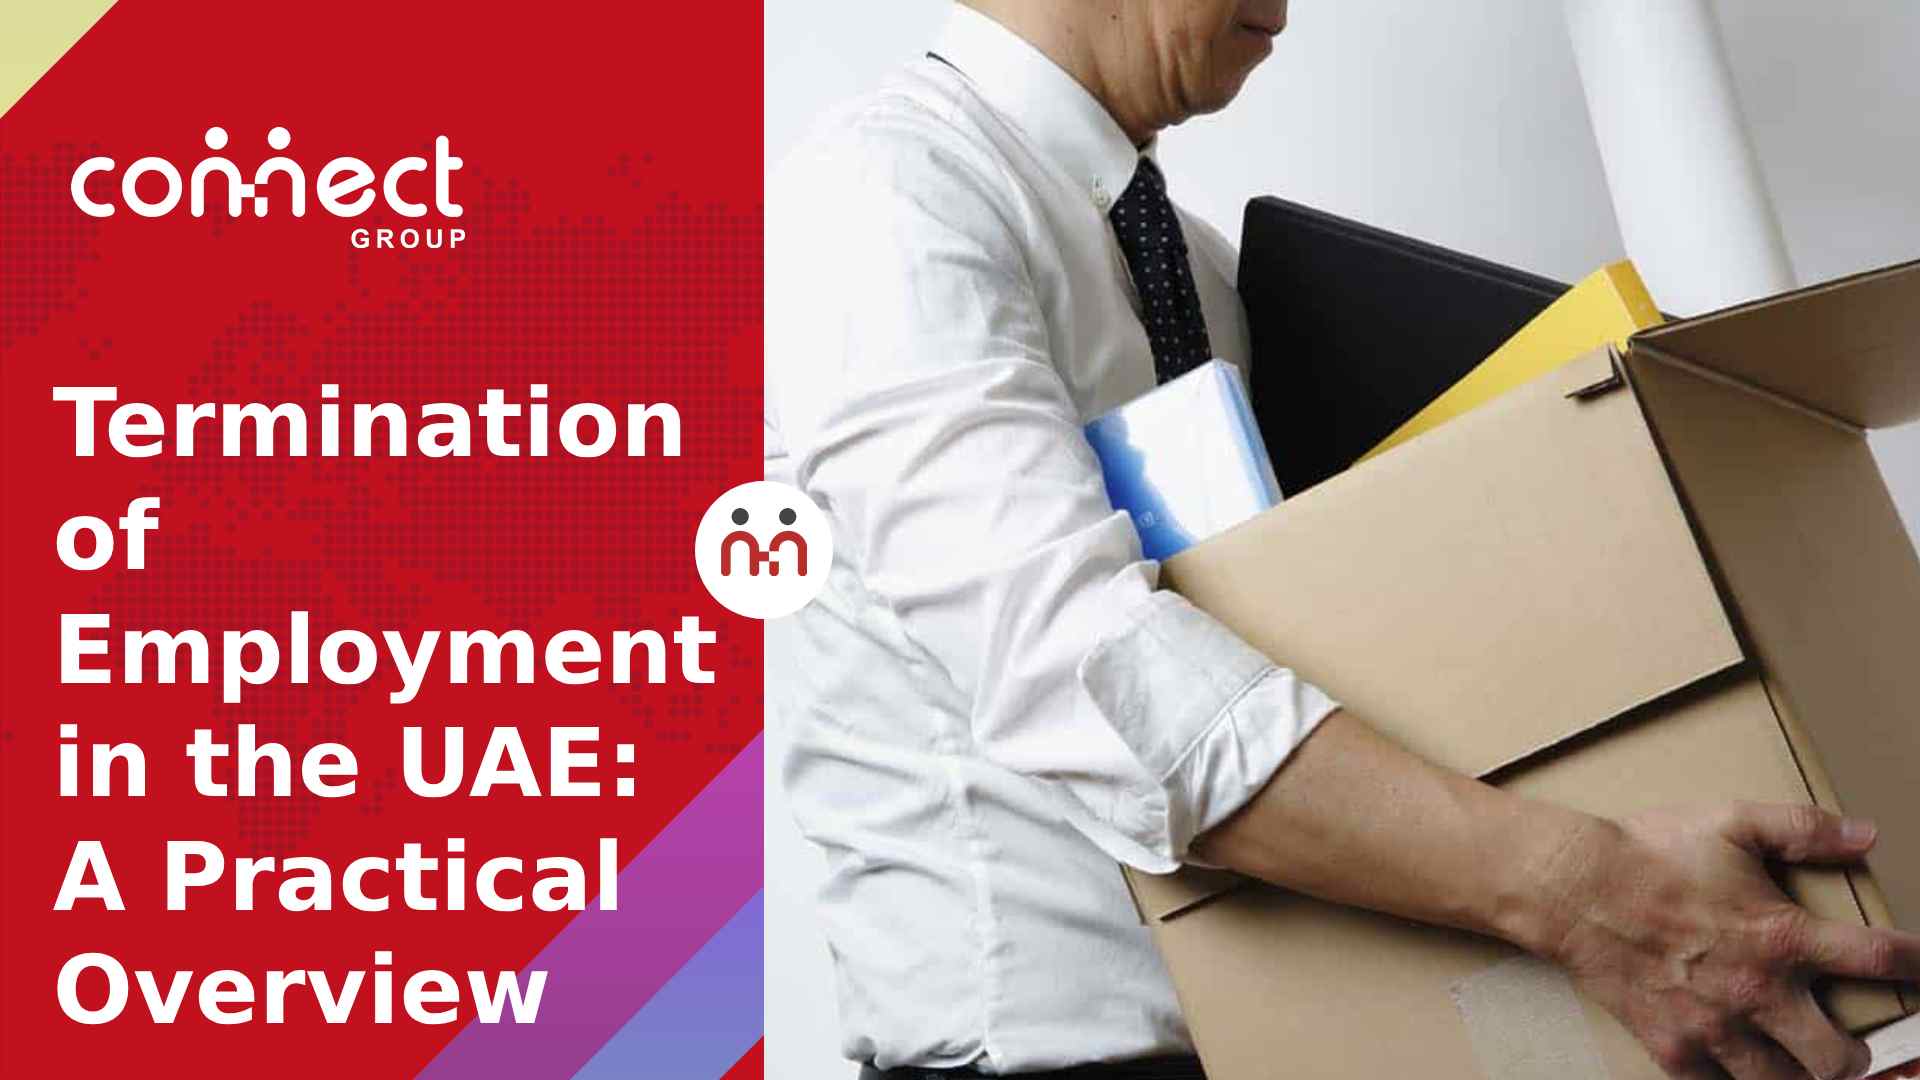 Termination of Employment in the UAE: A Practical Overview